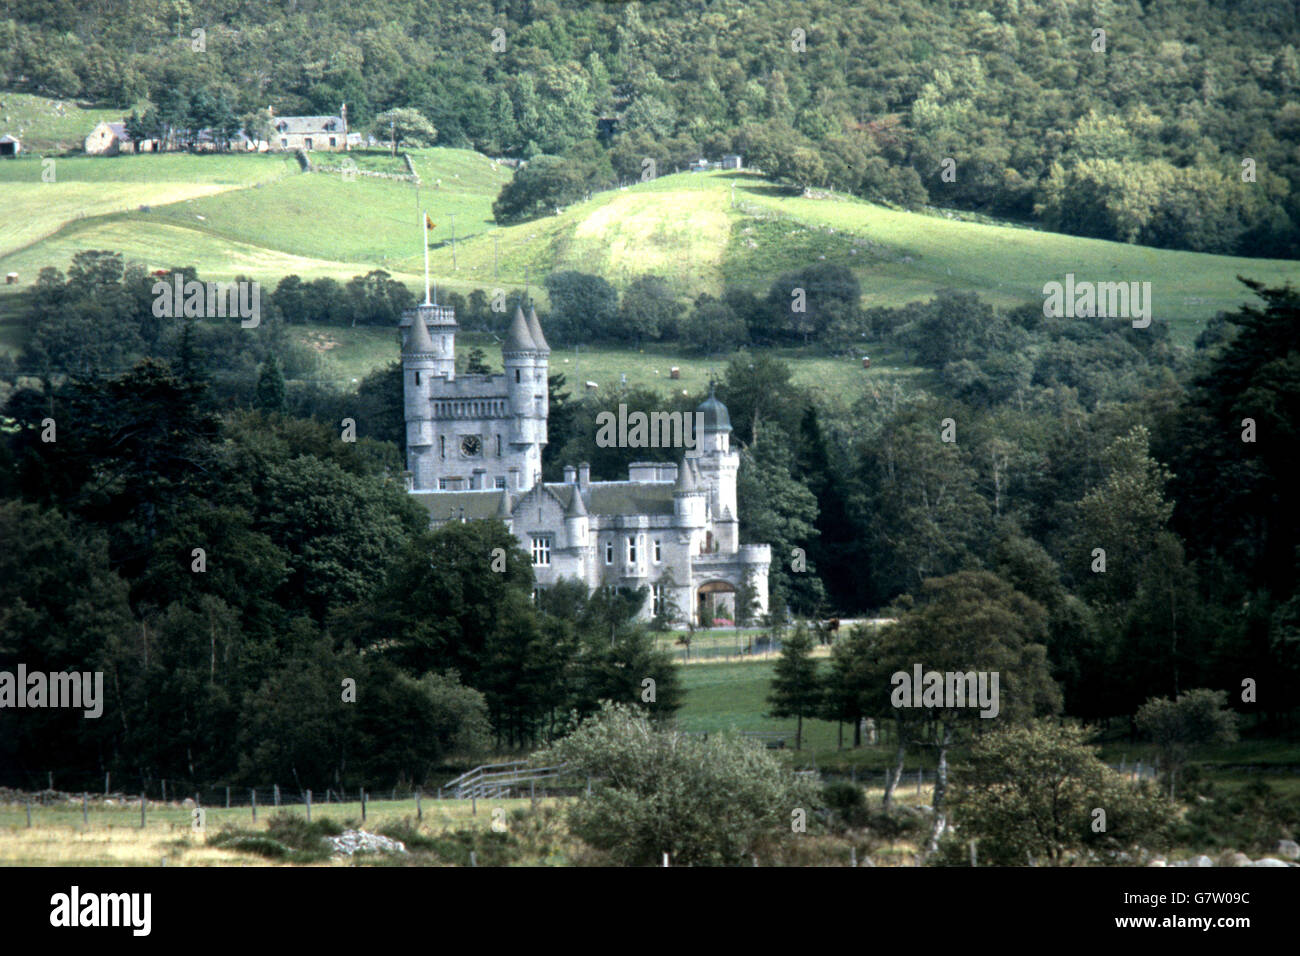 Balmoral Castle, Aberdeenshire, the 19th Century holiday home where the Queen and members of the Royal Family spend their traditional holidays between August and September each year. Stock Photo